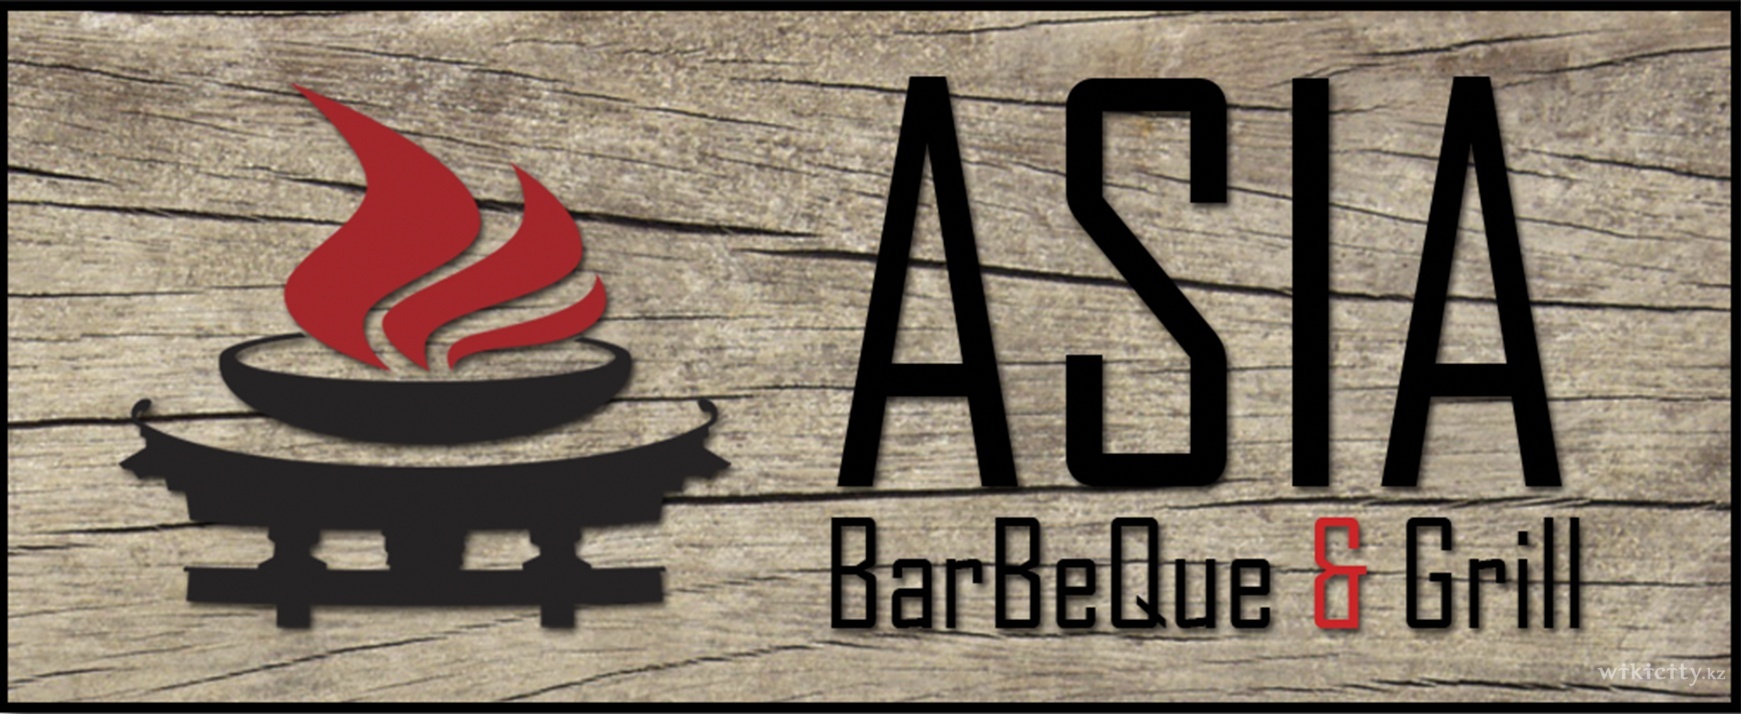 Фото ASIA BarBeQue & Grill Алматы. 